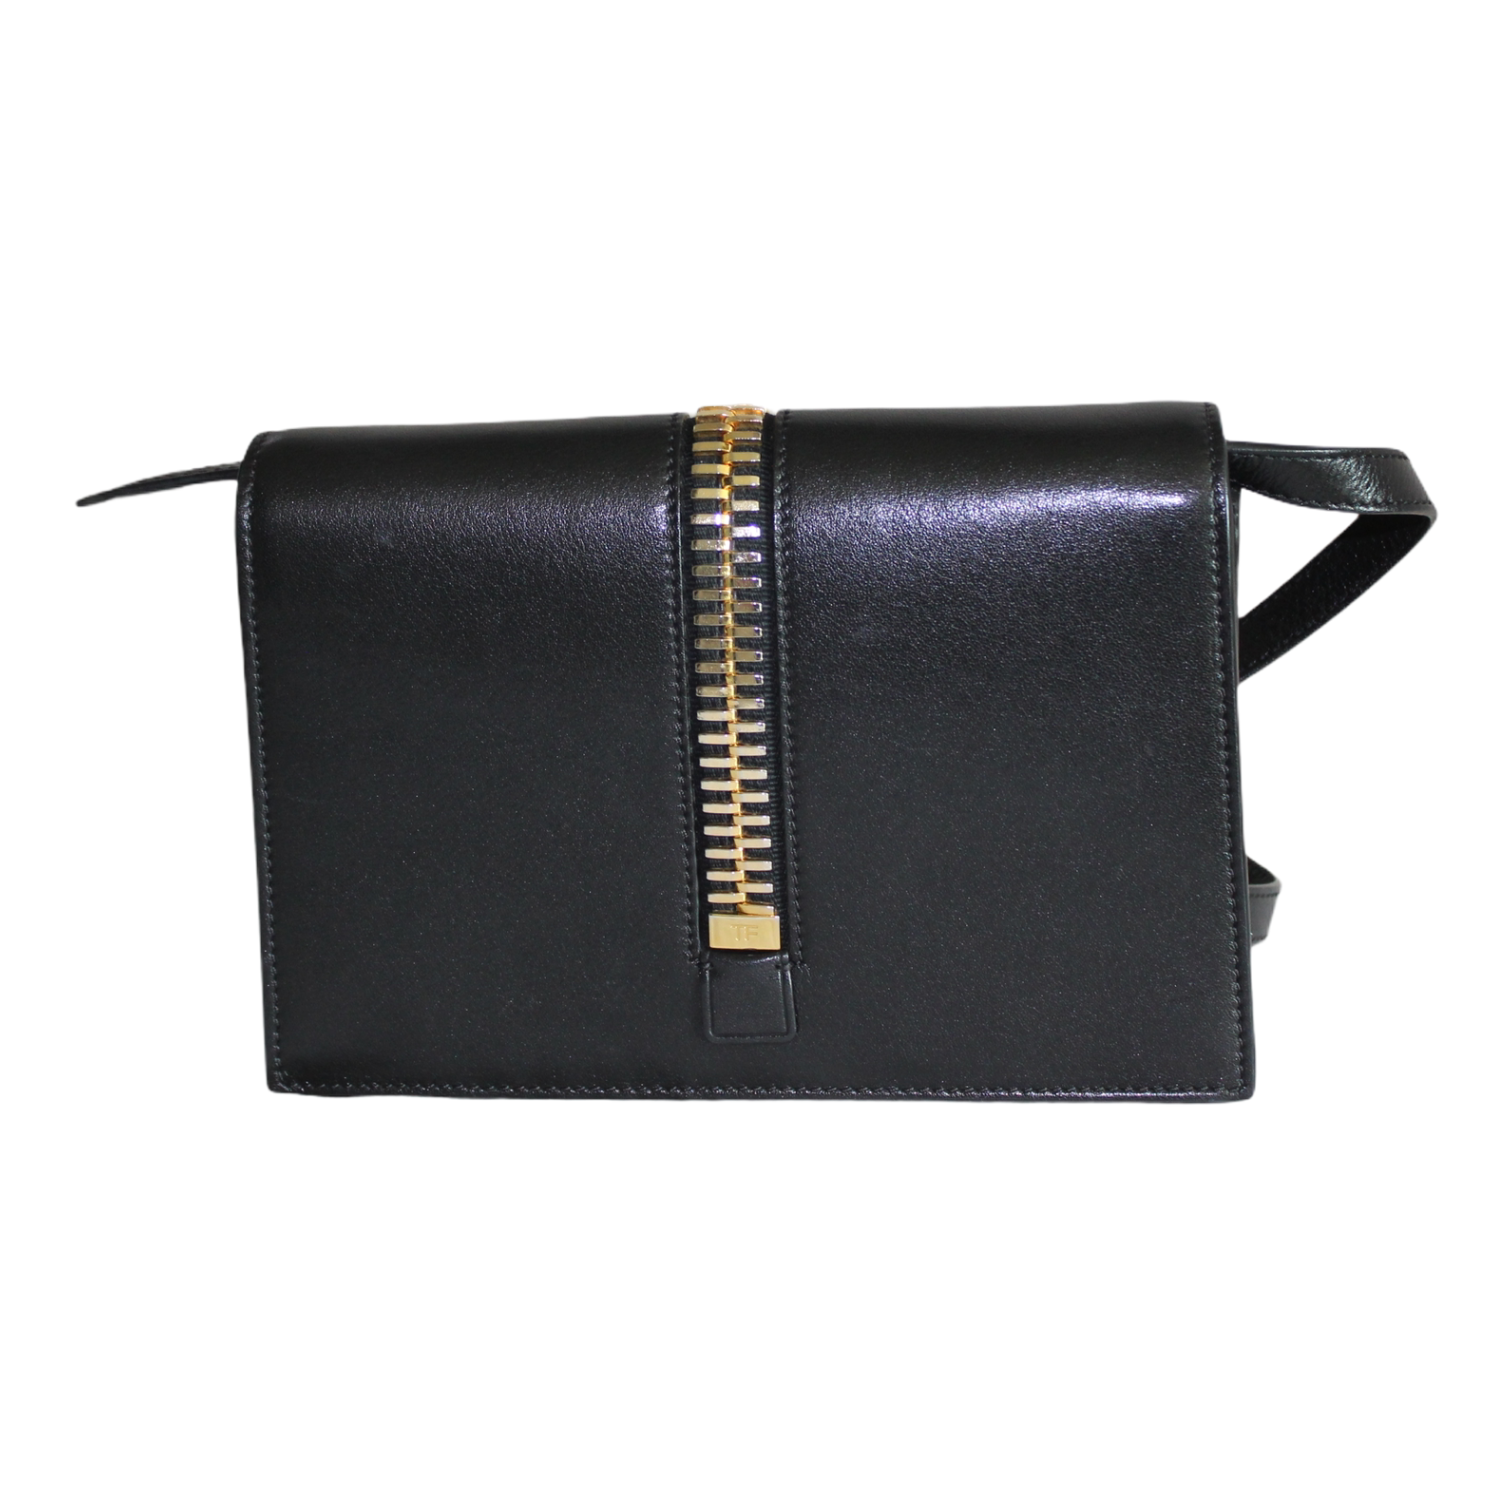 Pre Loved Tom Ford Black Leather Sedgwick Zip Clutch